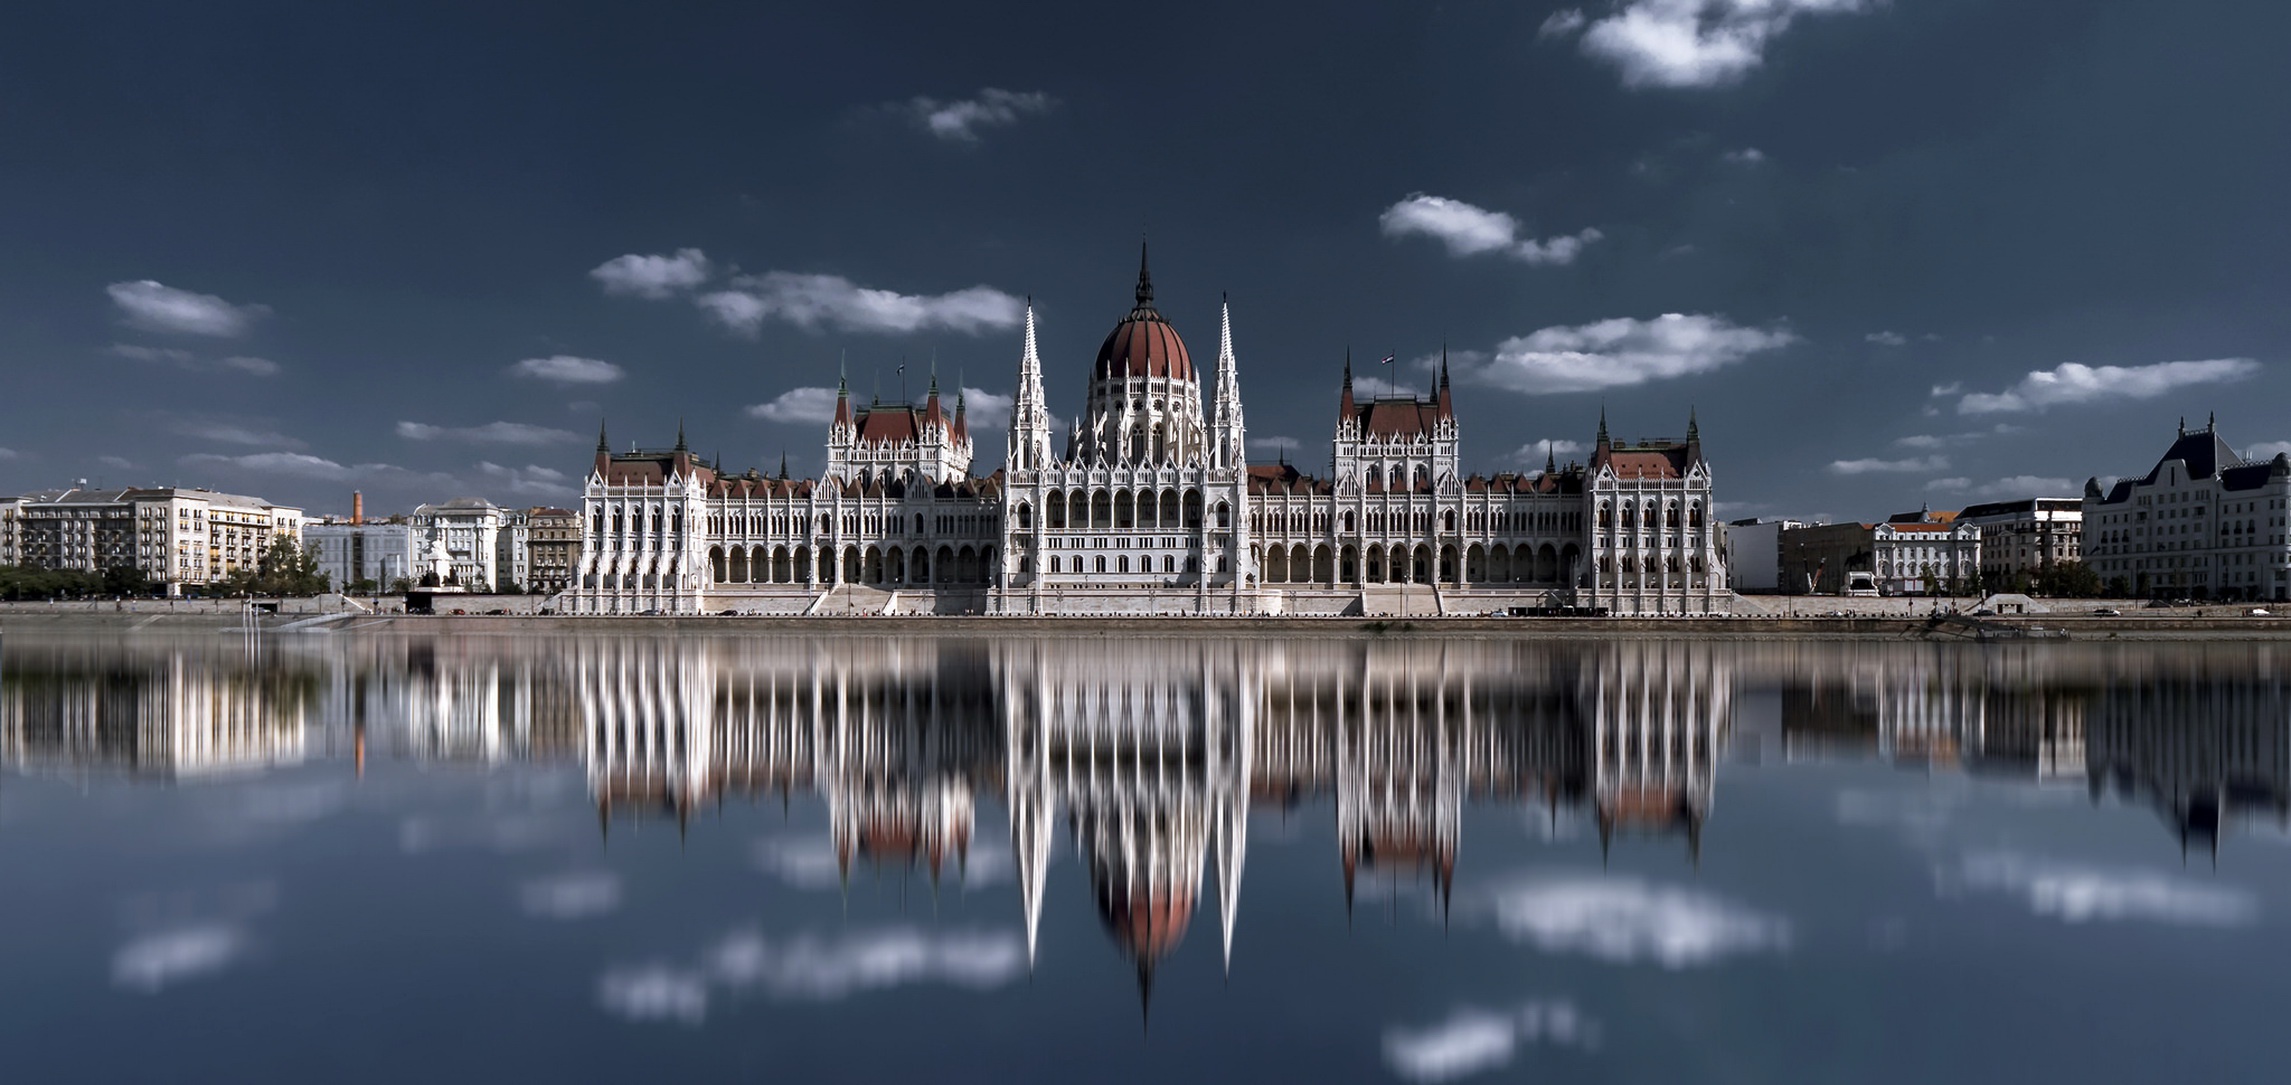 Architecture Building Hungarian Parliament Building Hungary Palace Reflection 2291x1085